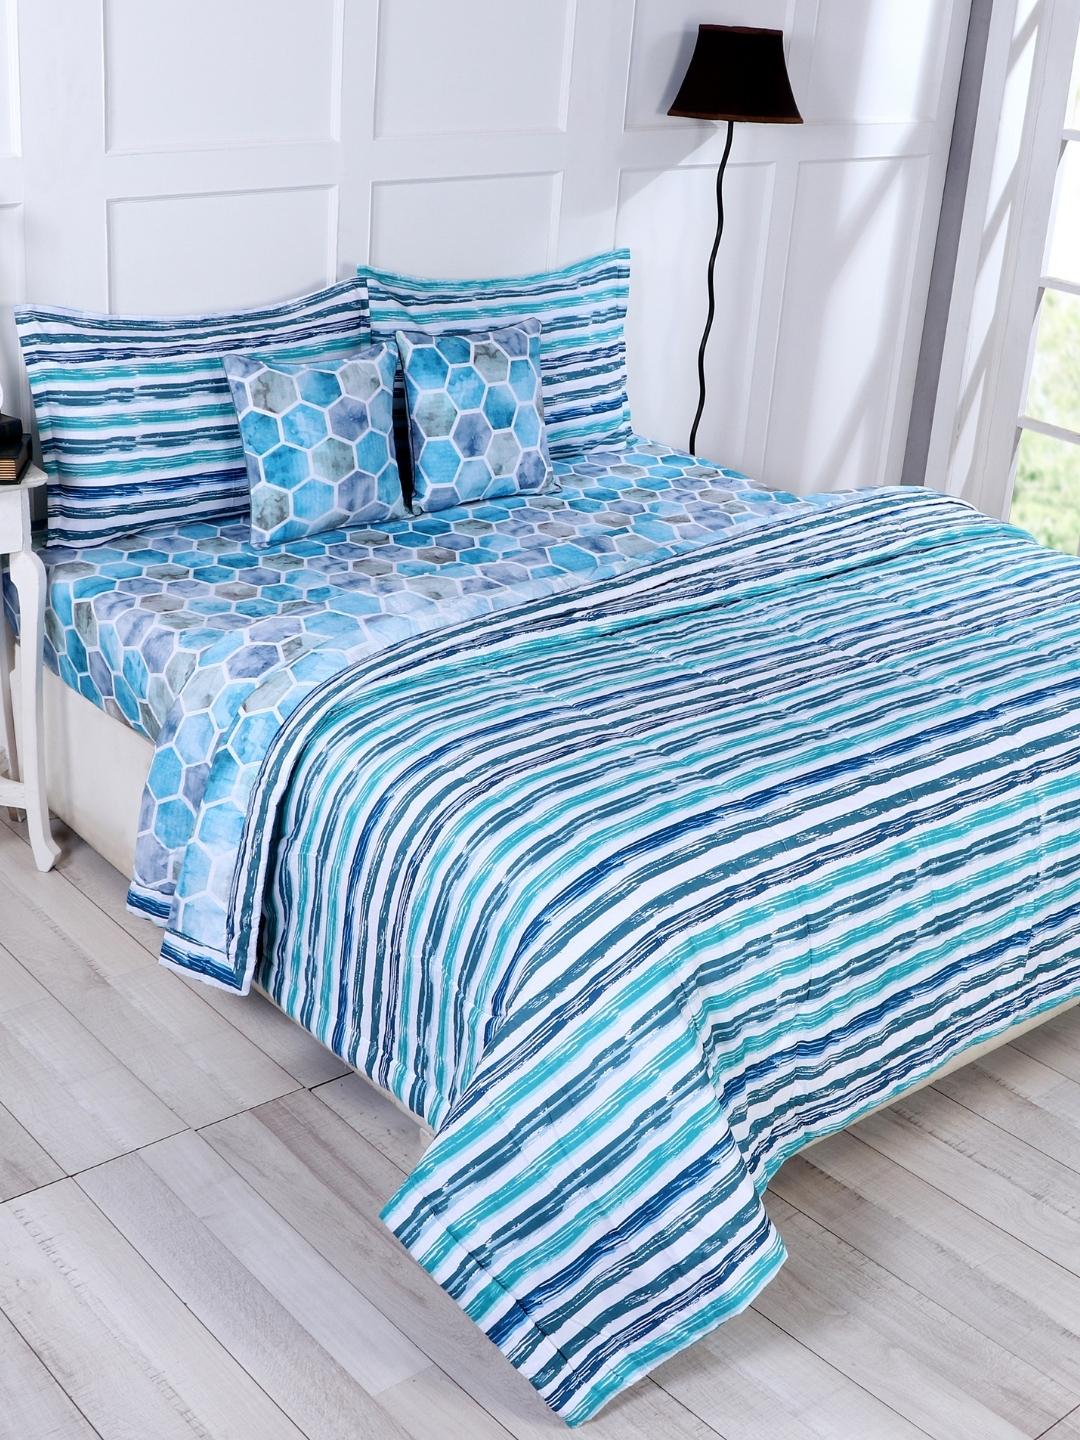 Cotton 6 Pcs Double Bed Bedding Set-Blue and Grey-Turquoise Blue